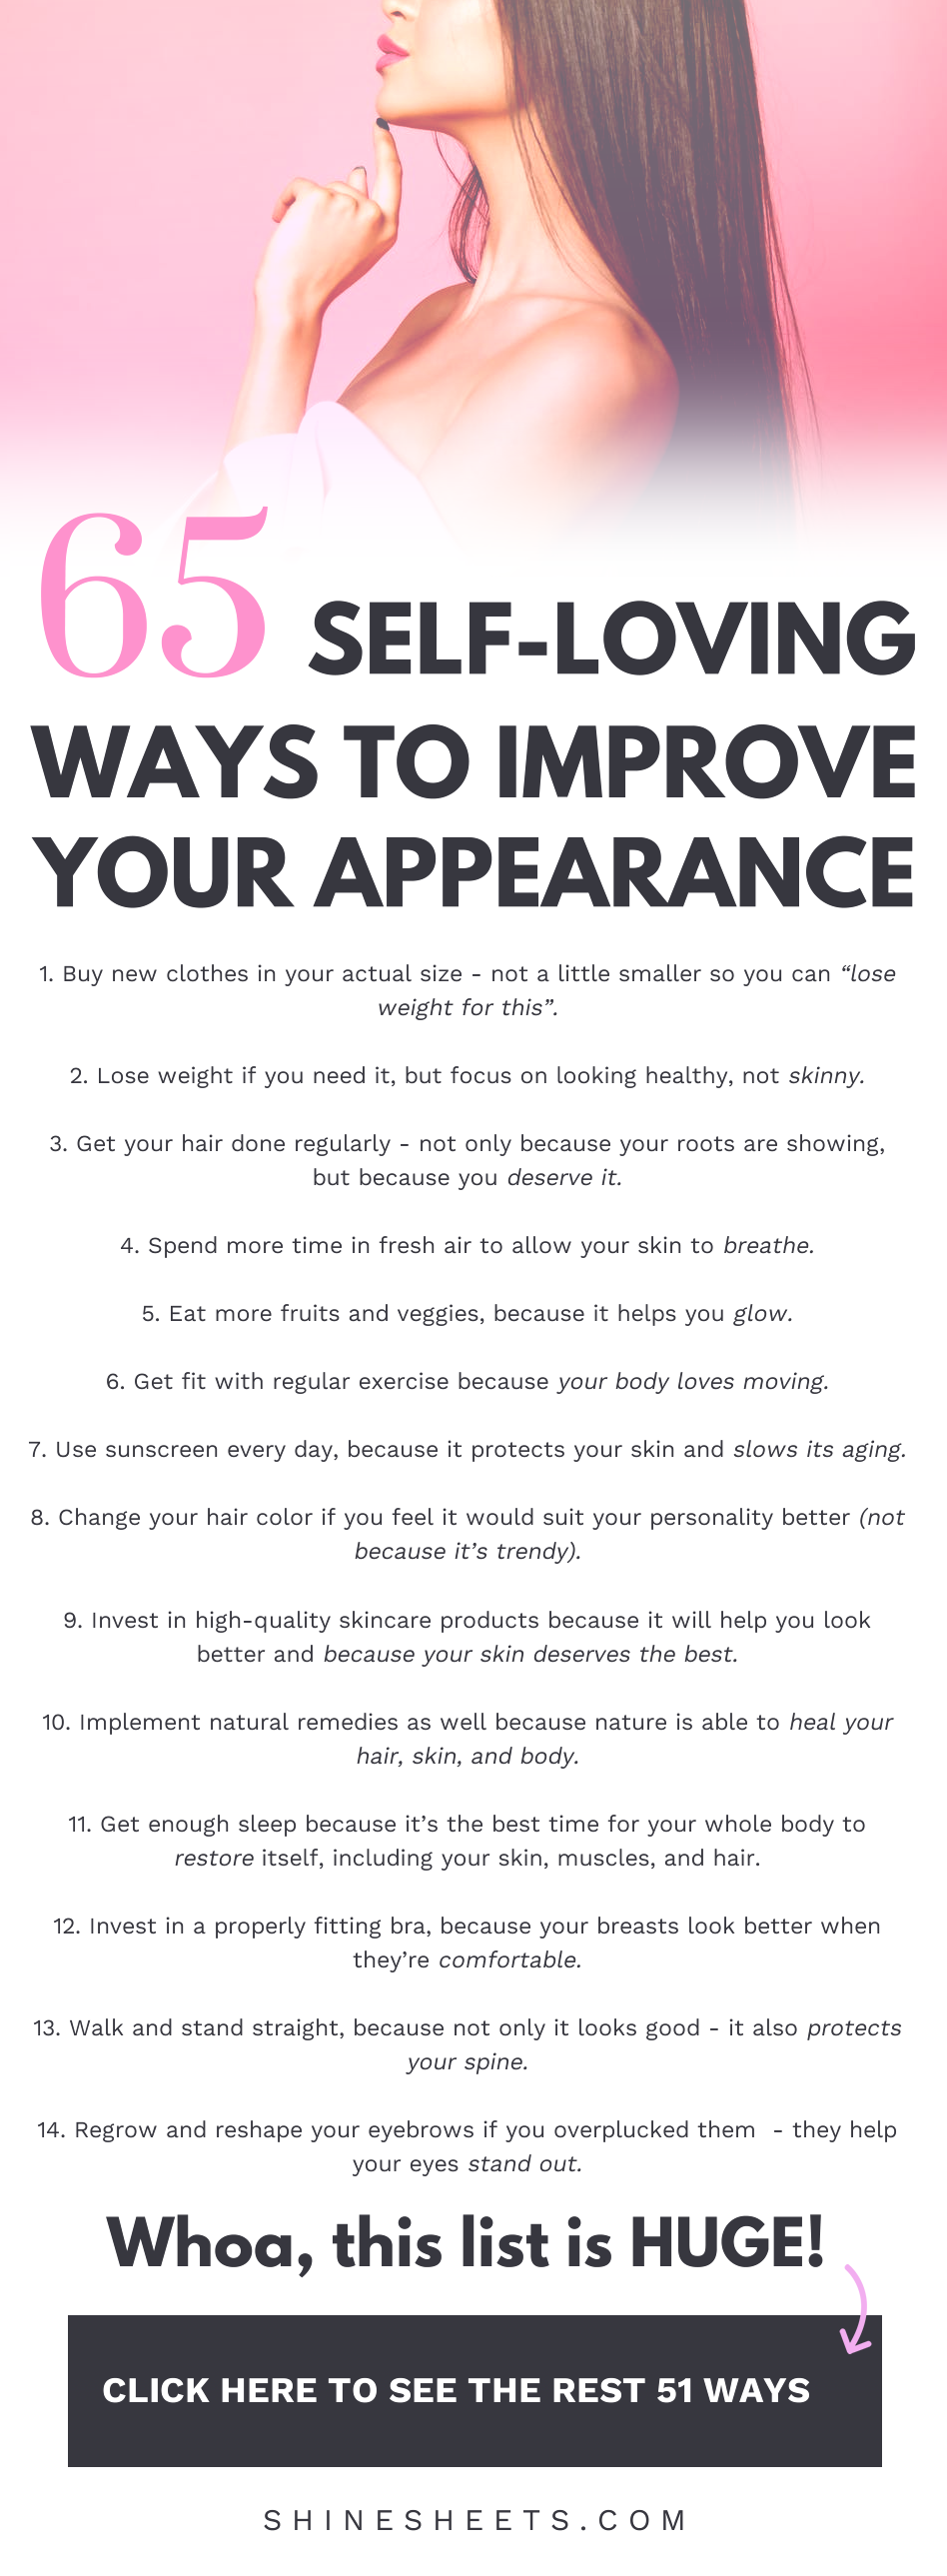 65 Self-Loving Ways To Improve Your Appearance - 65 Self-Loving Ways To Improve Your Appearance -   18 beauty tips ideas